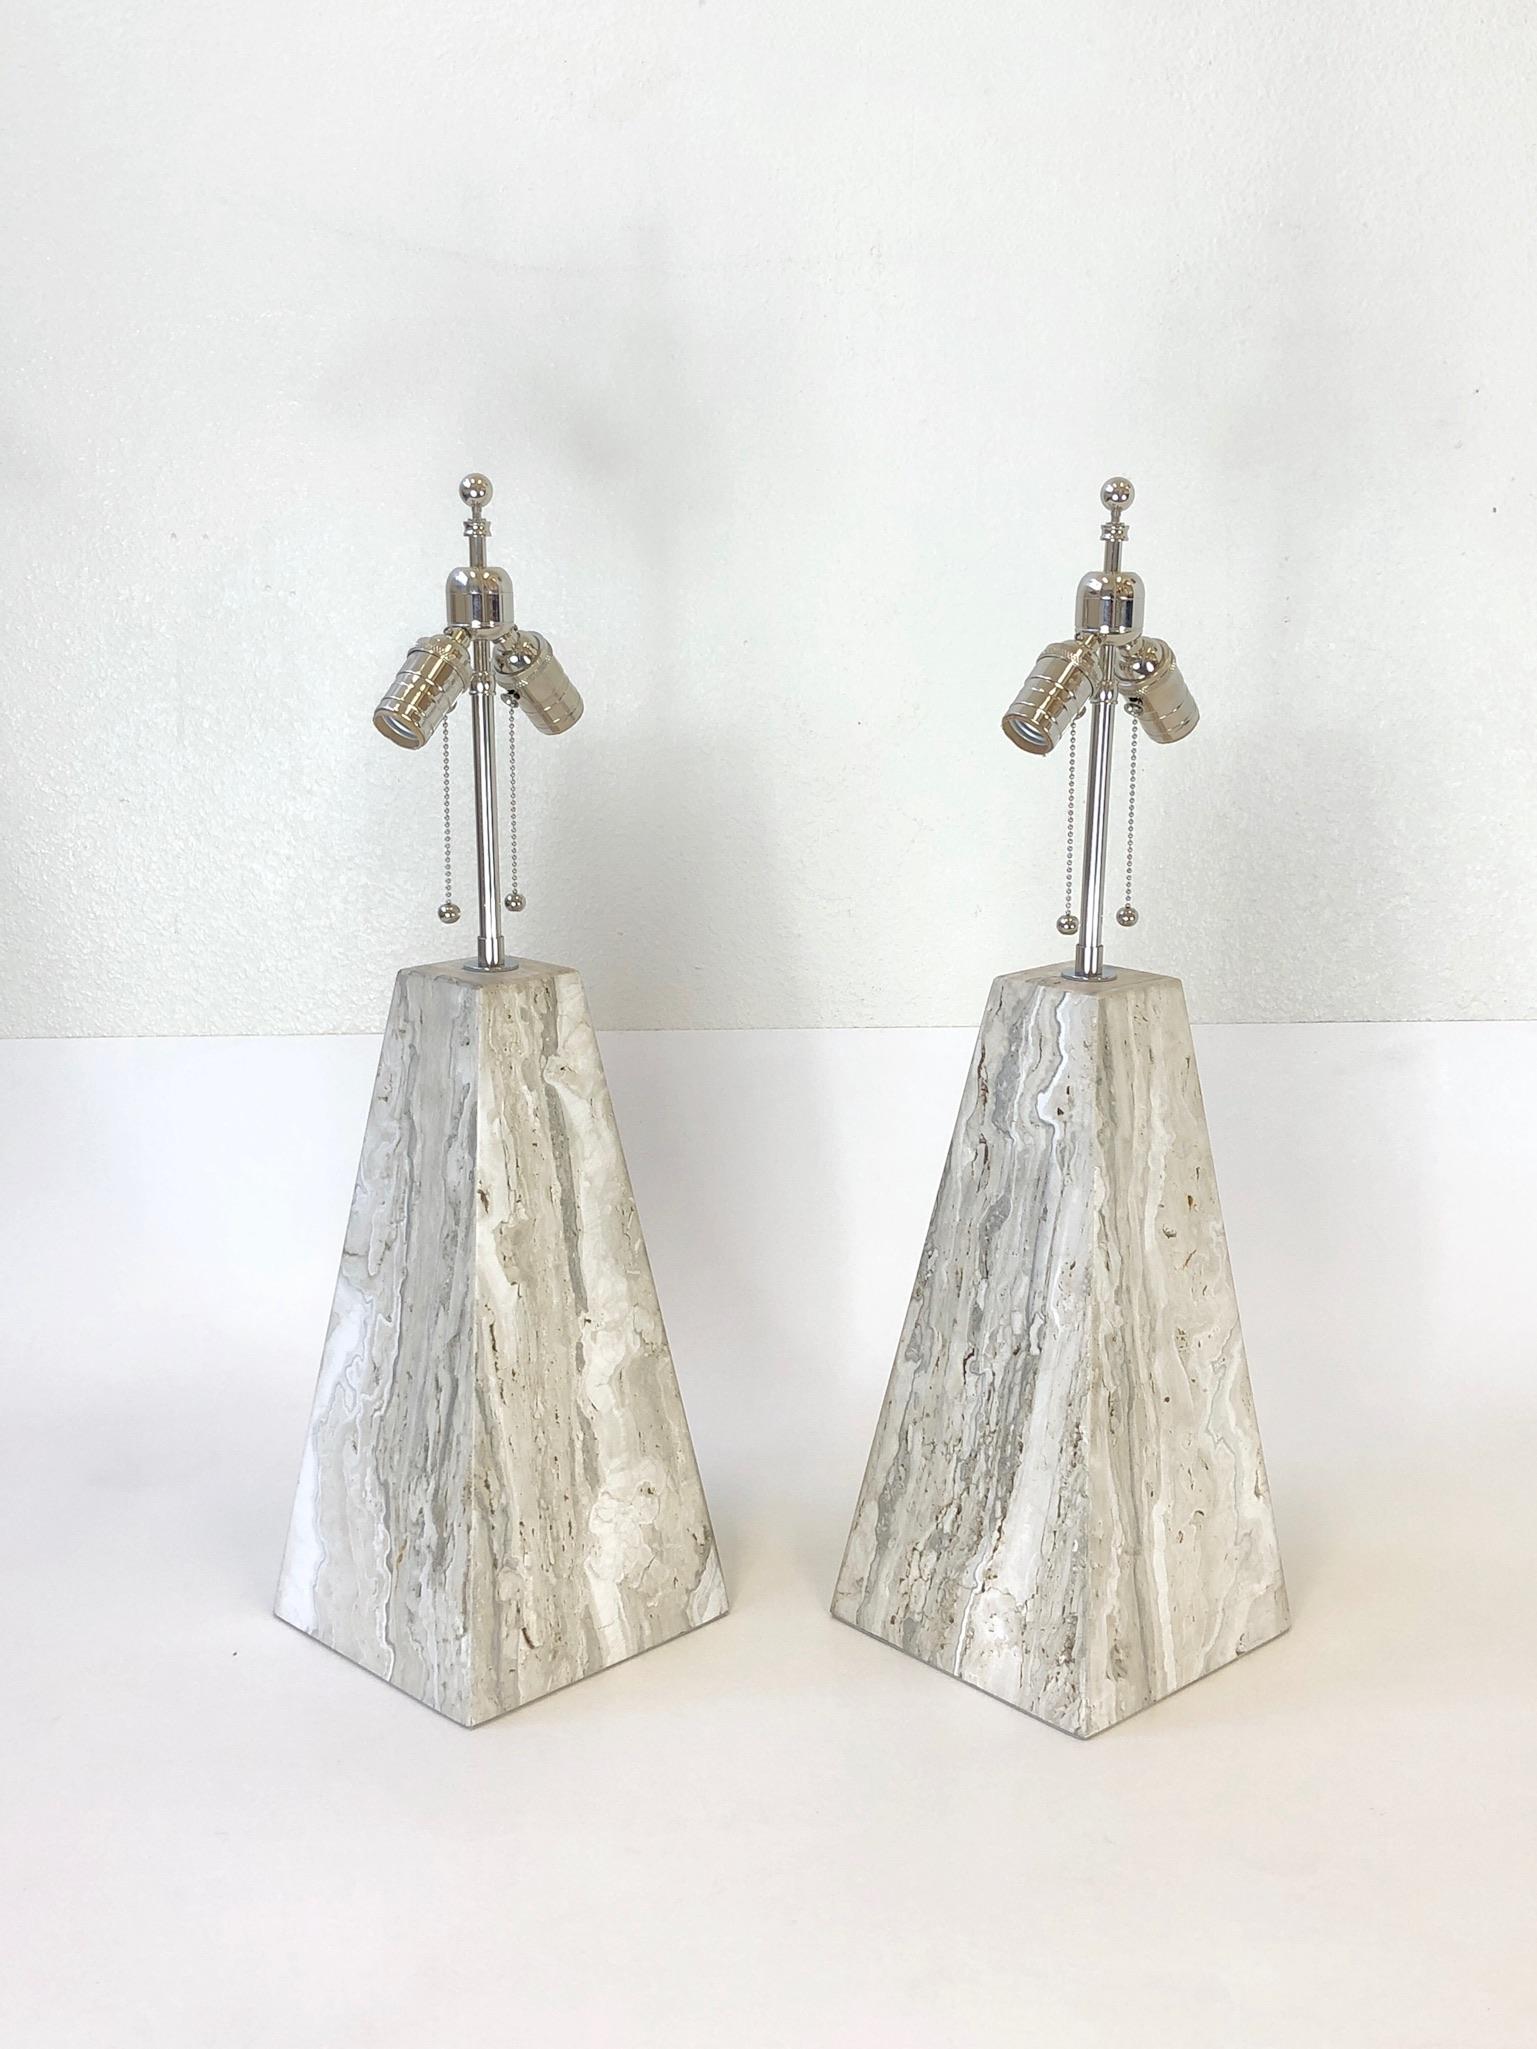 Pair of Italian Travertine and Polish Nickel Obelisk Shape Table Lamps  For Sale 7